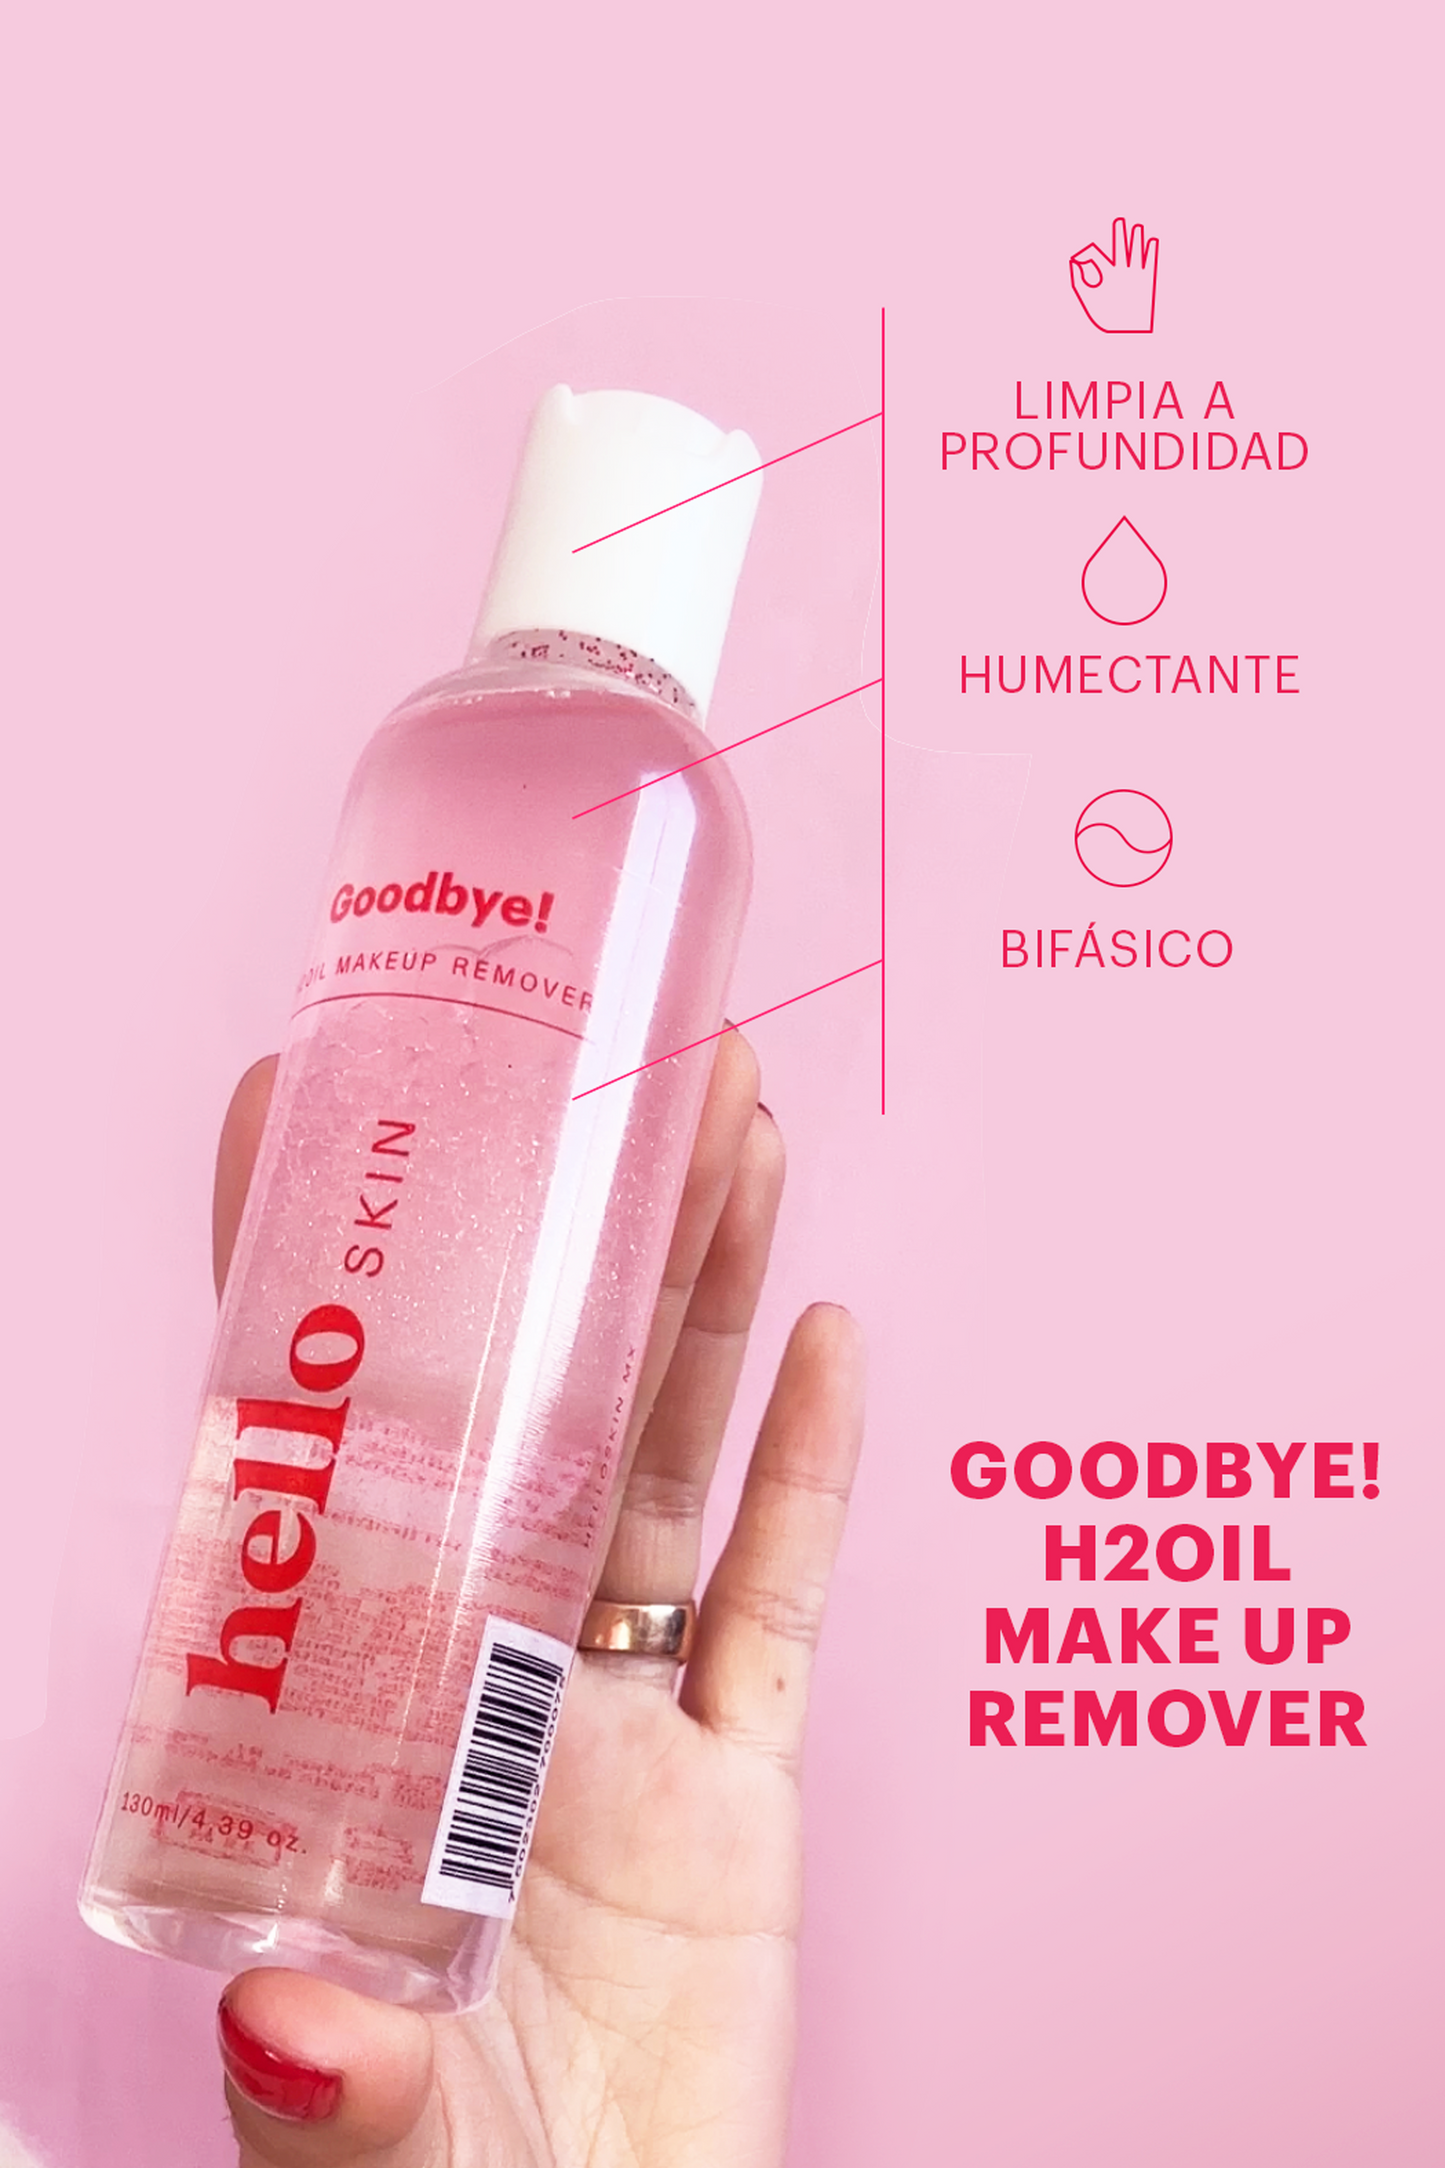 GOODBYE! H2OIL MAKEUP REMOVER